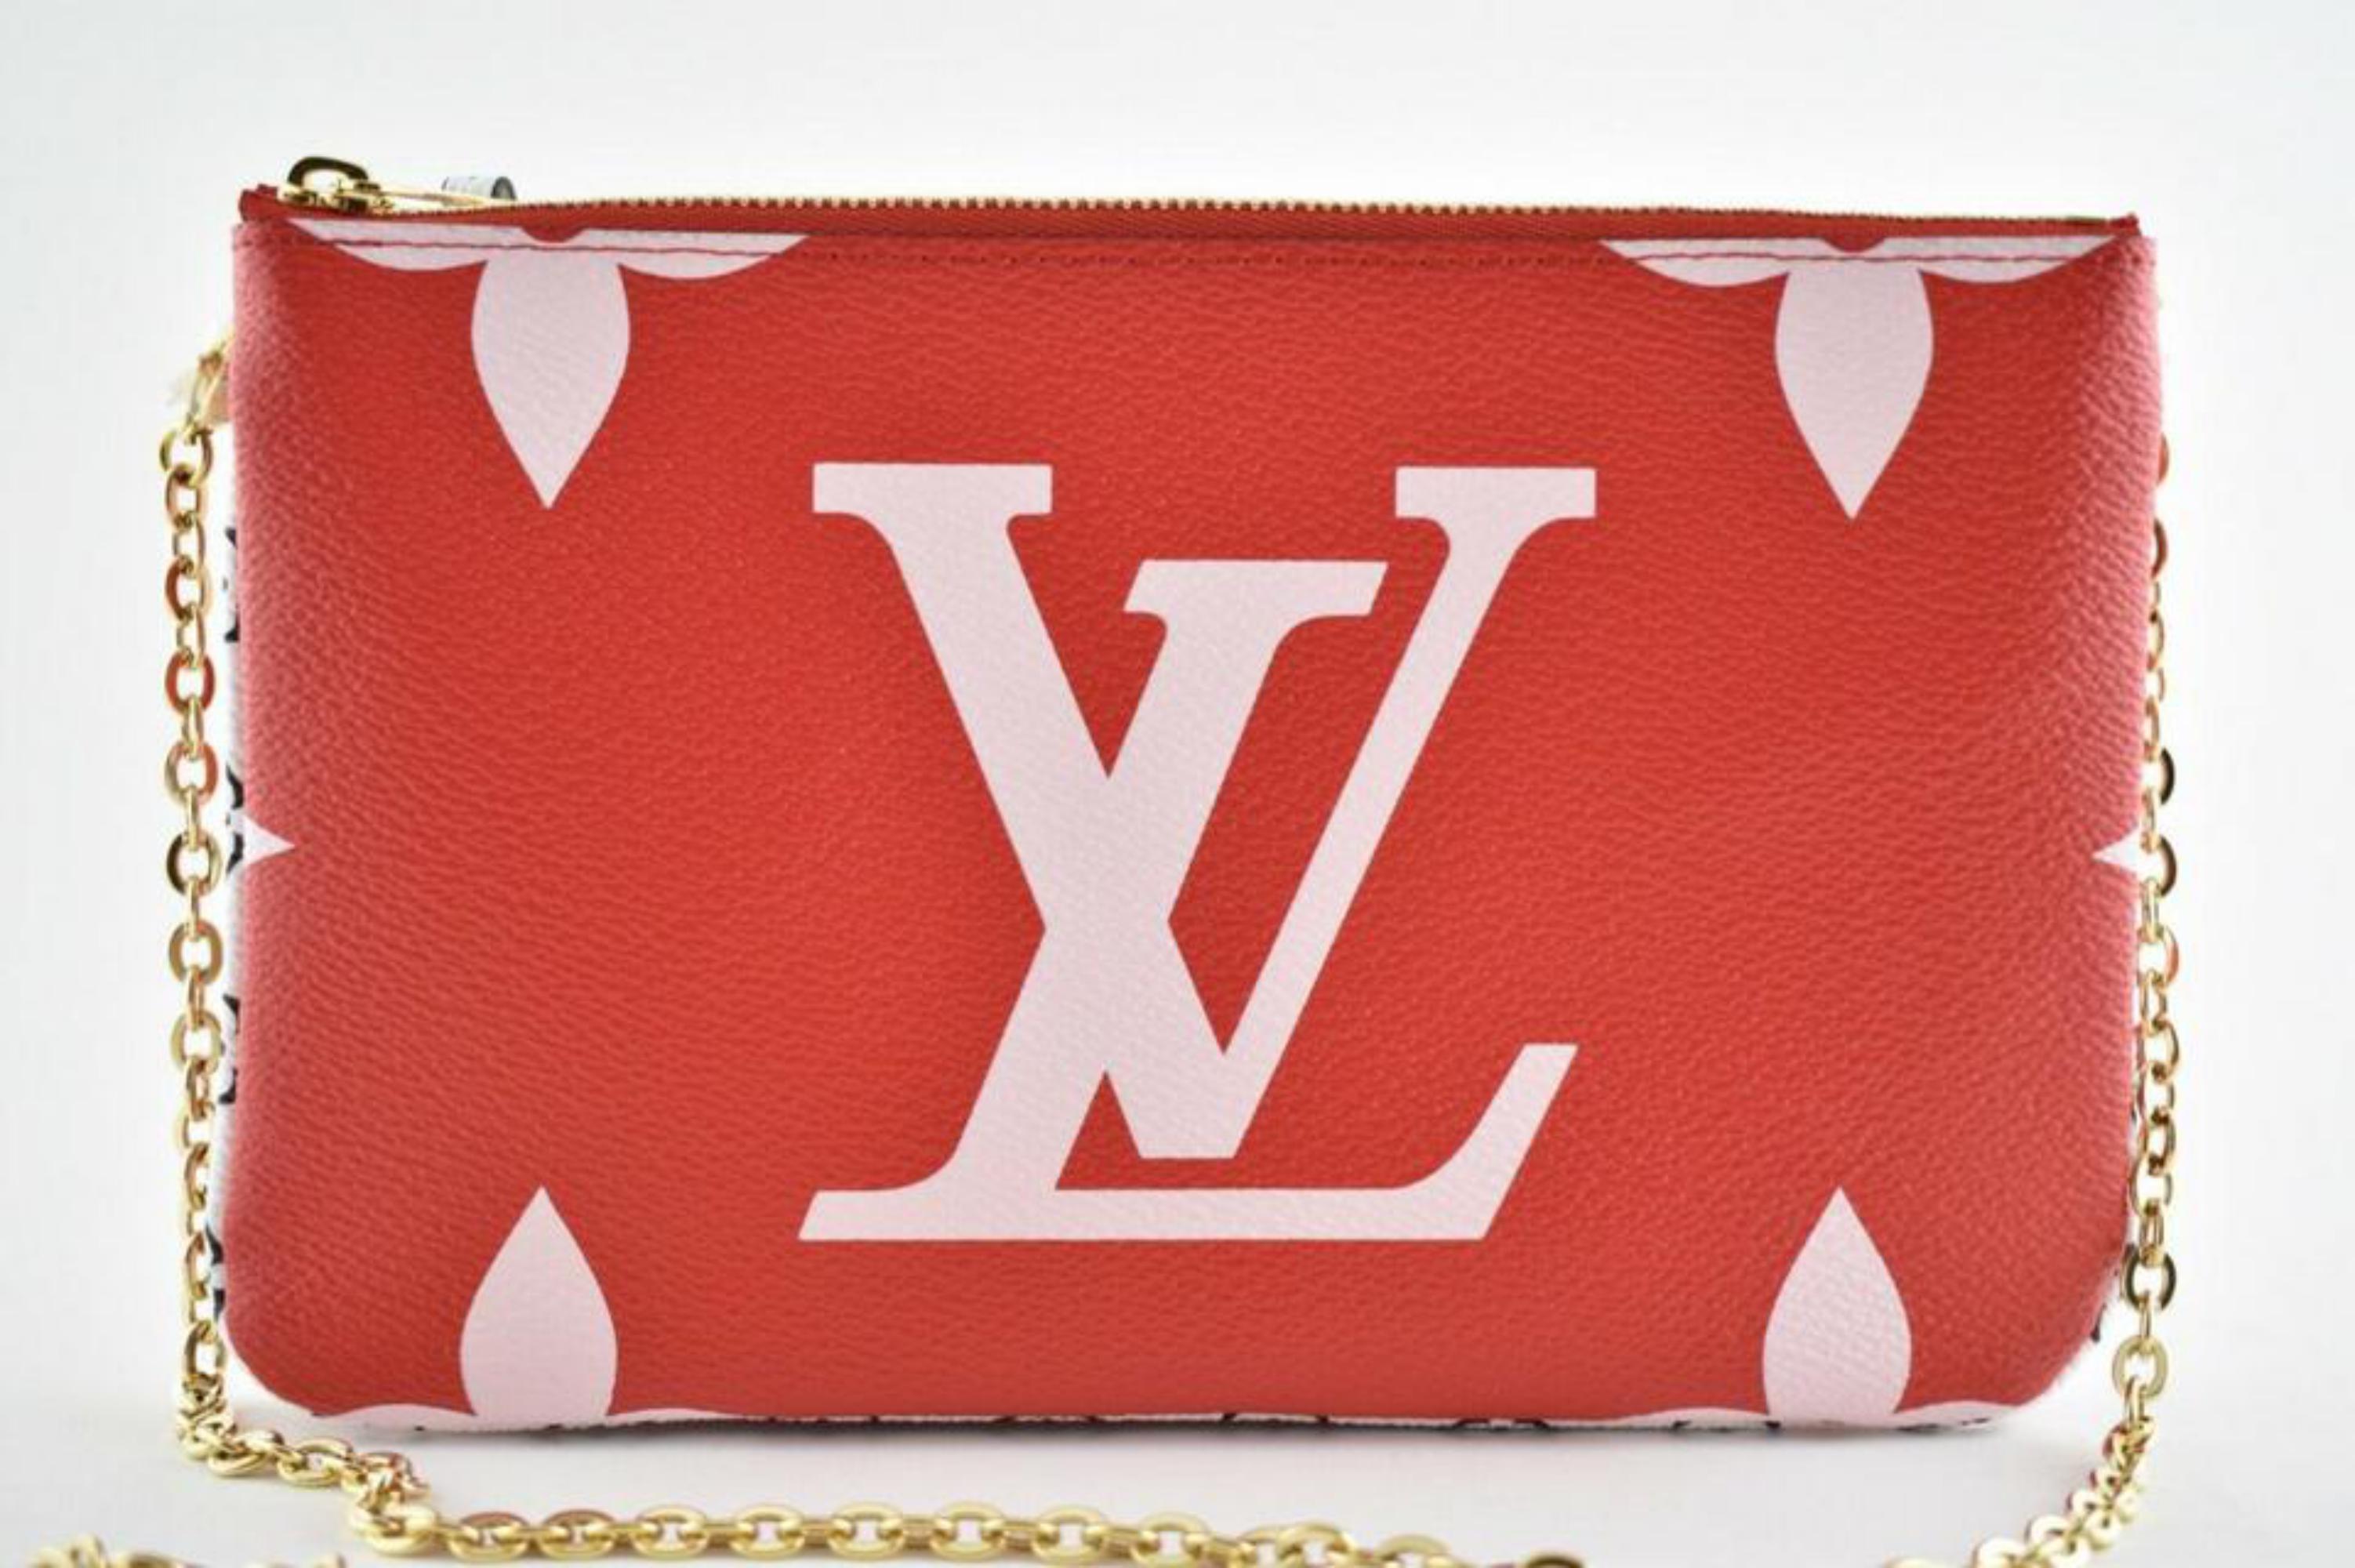 Louis Vuitton Pochette Giant Pink Double Zip Chain 870616 Red Cross Body Bag In New Condition For Sale In Forest Hills, NY